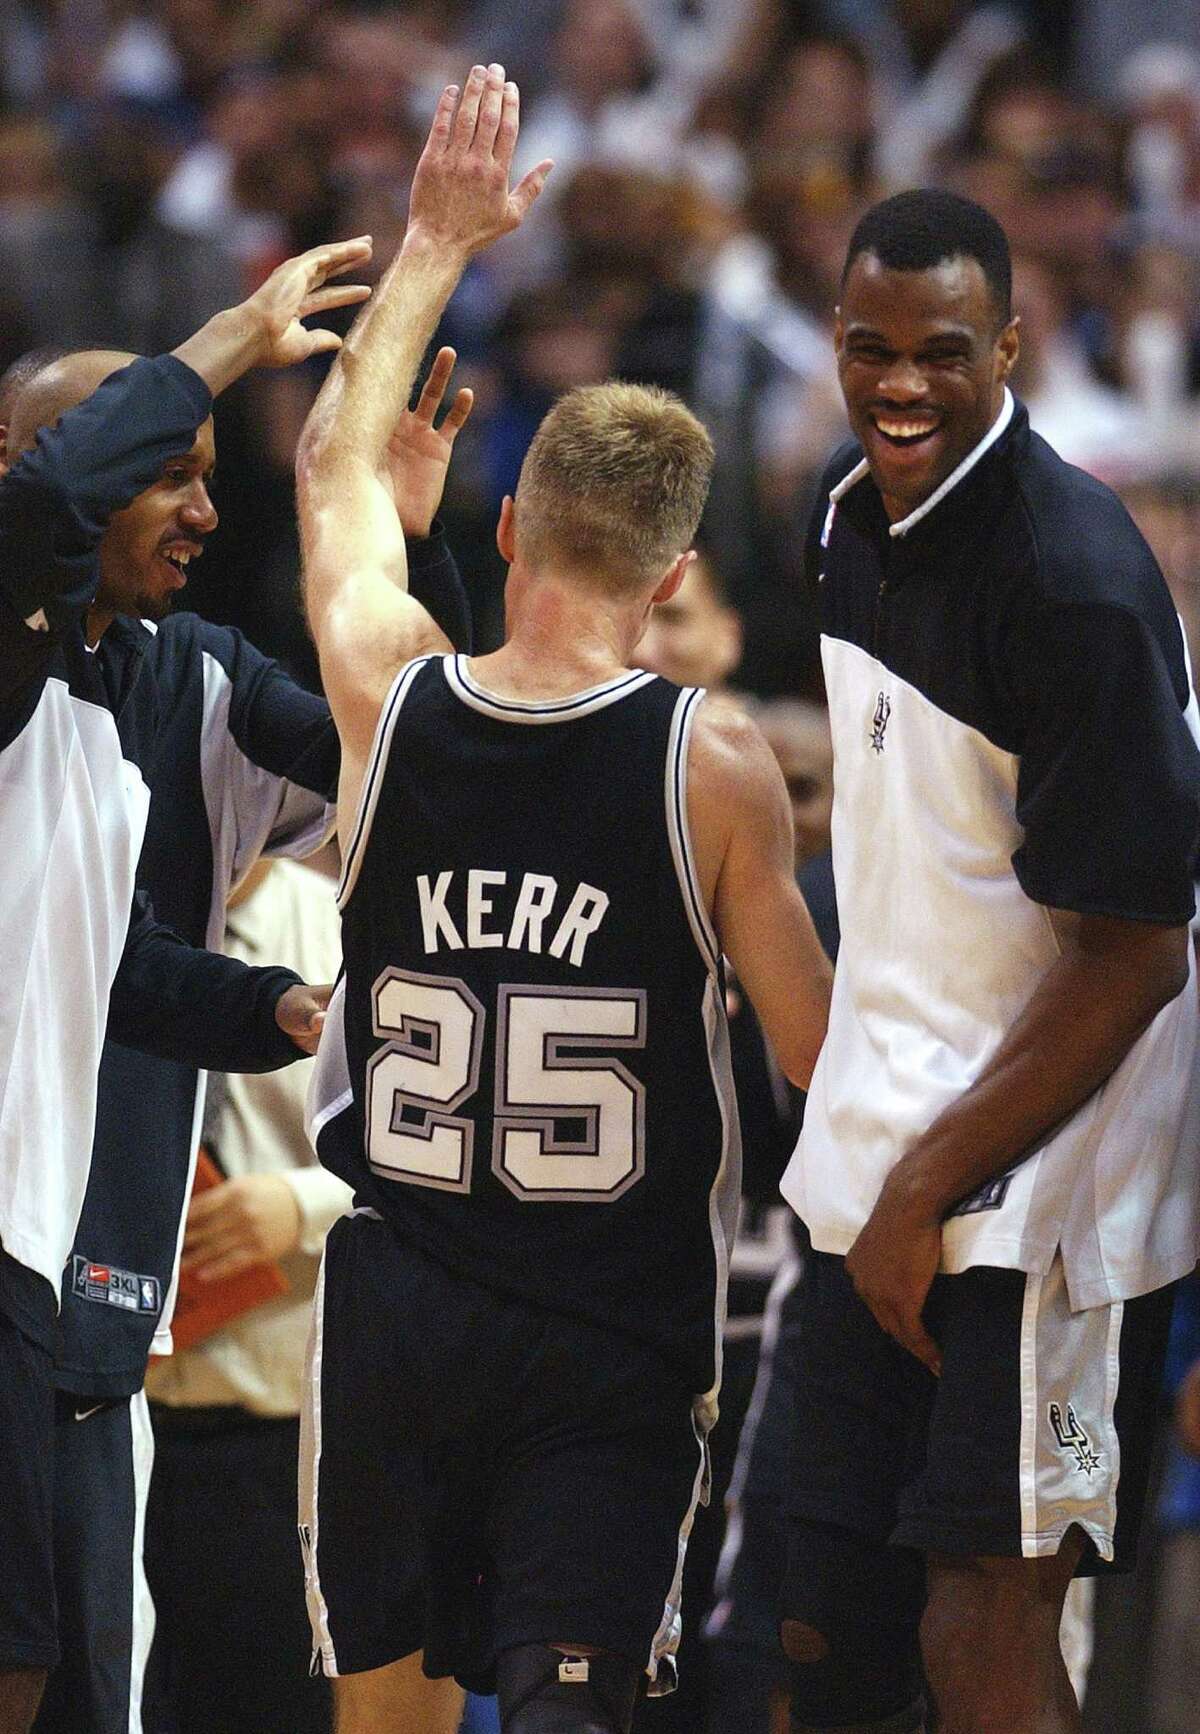 San Antonio Spurs players Steve Kerr, right, Danny Ferry (35), Kevin  Willis, rear, and trainer Will Sevening celebrate their 88-77 win over the  New Jersey Nets for the NBA Championship, Sunday, June